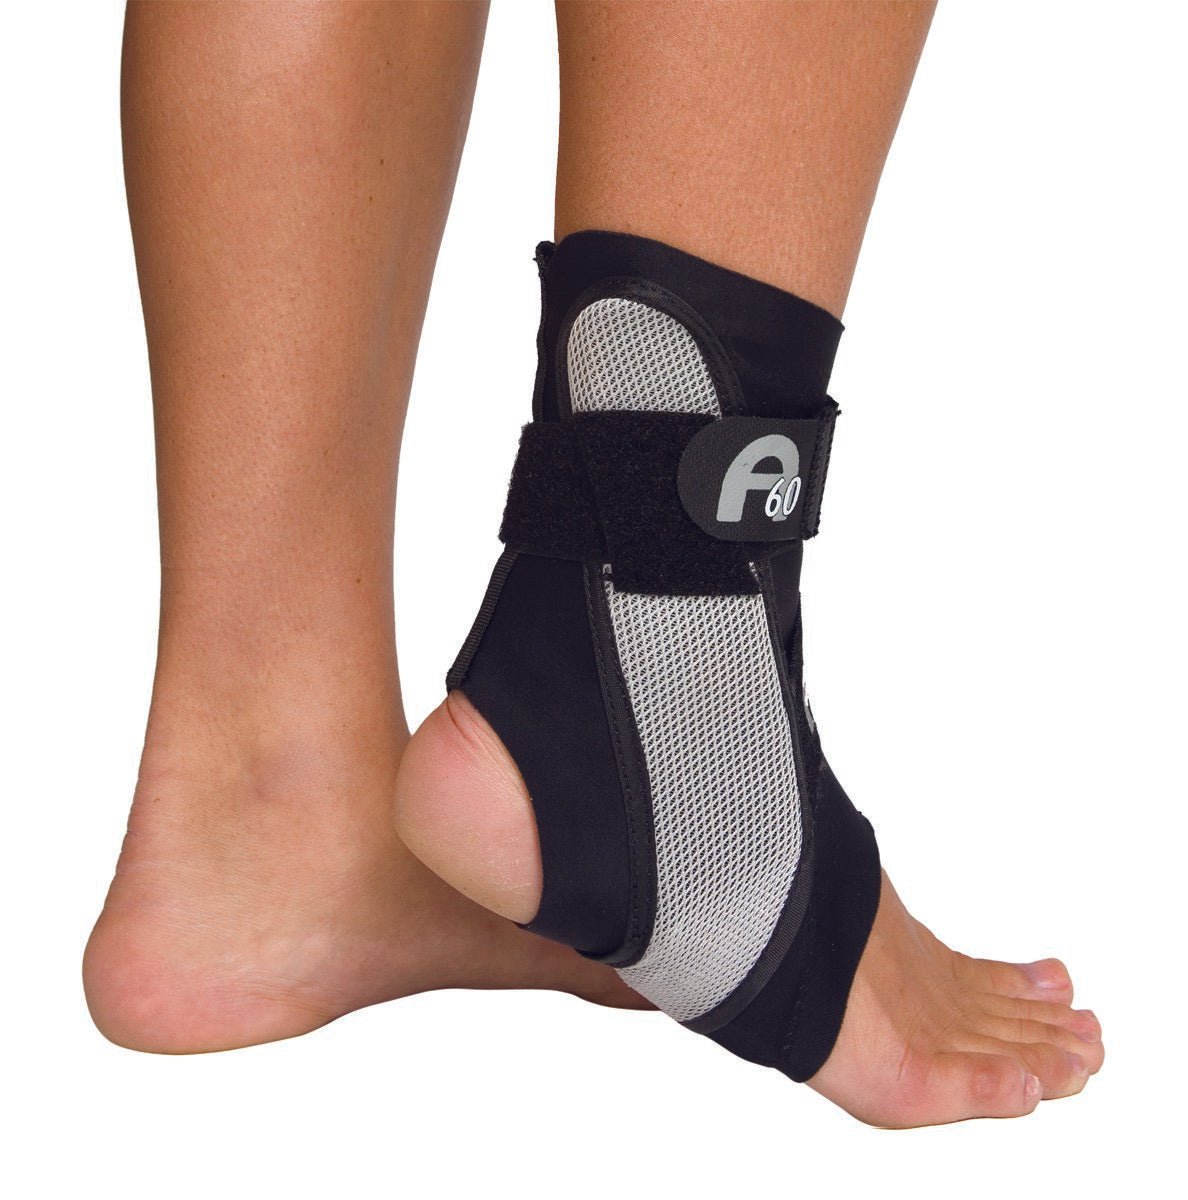 Aircast A60 Left Ankle Support - 565619_EA - 2